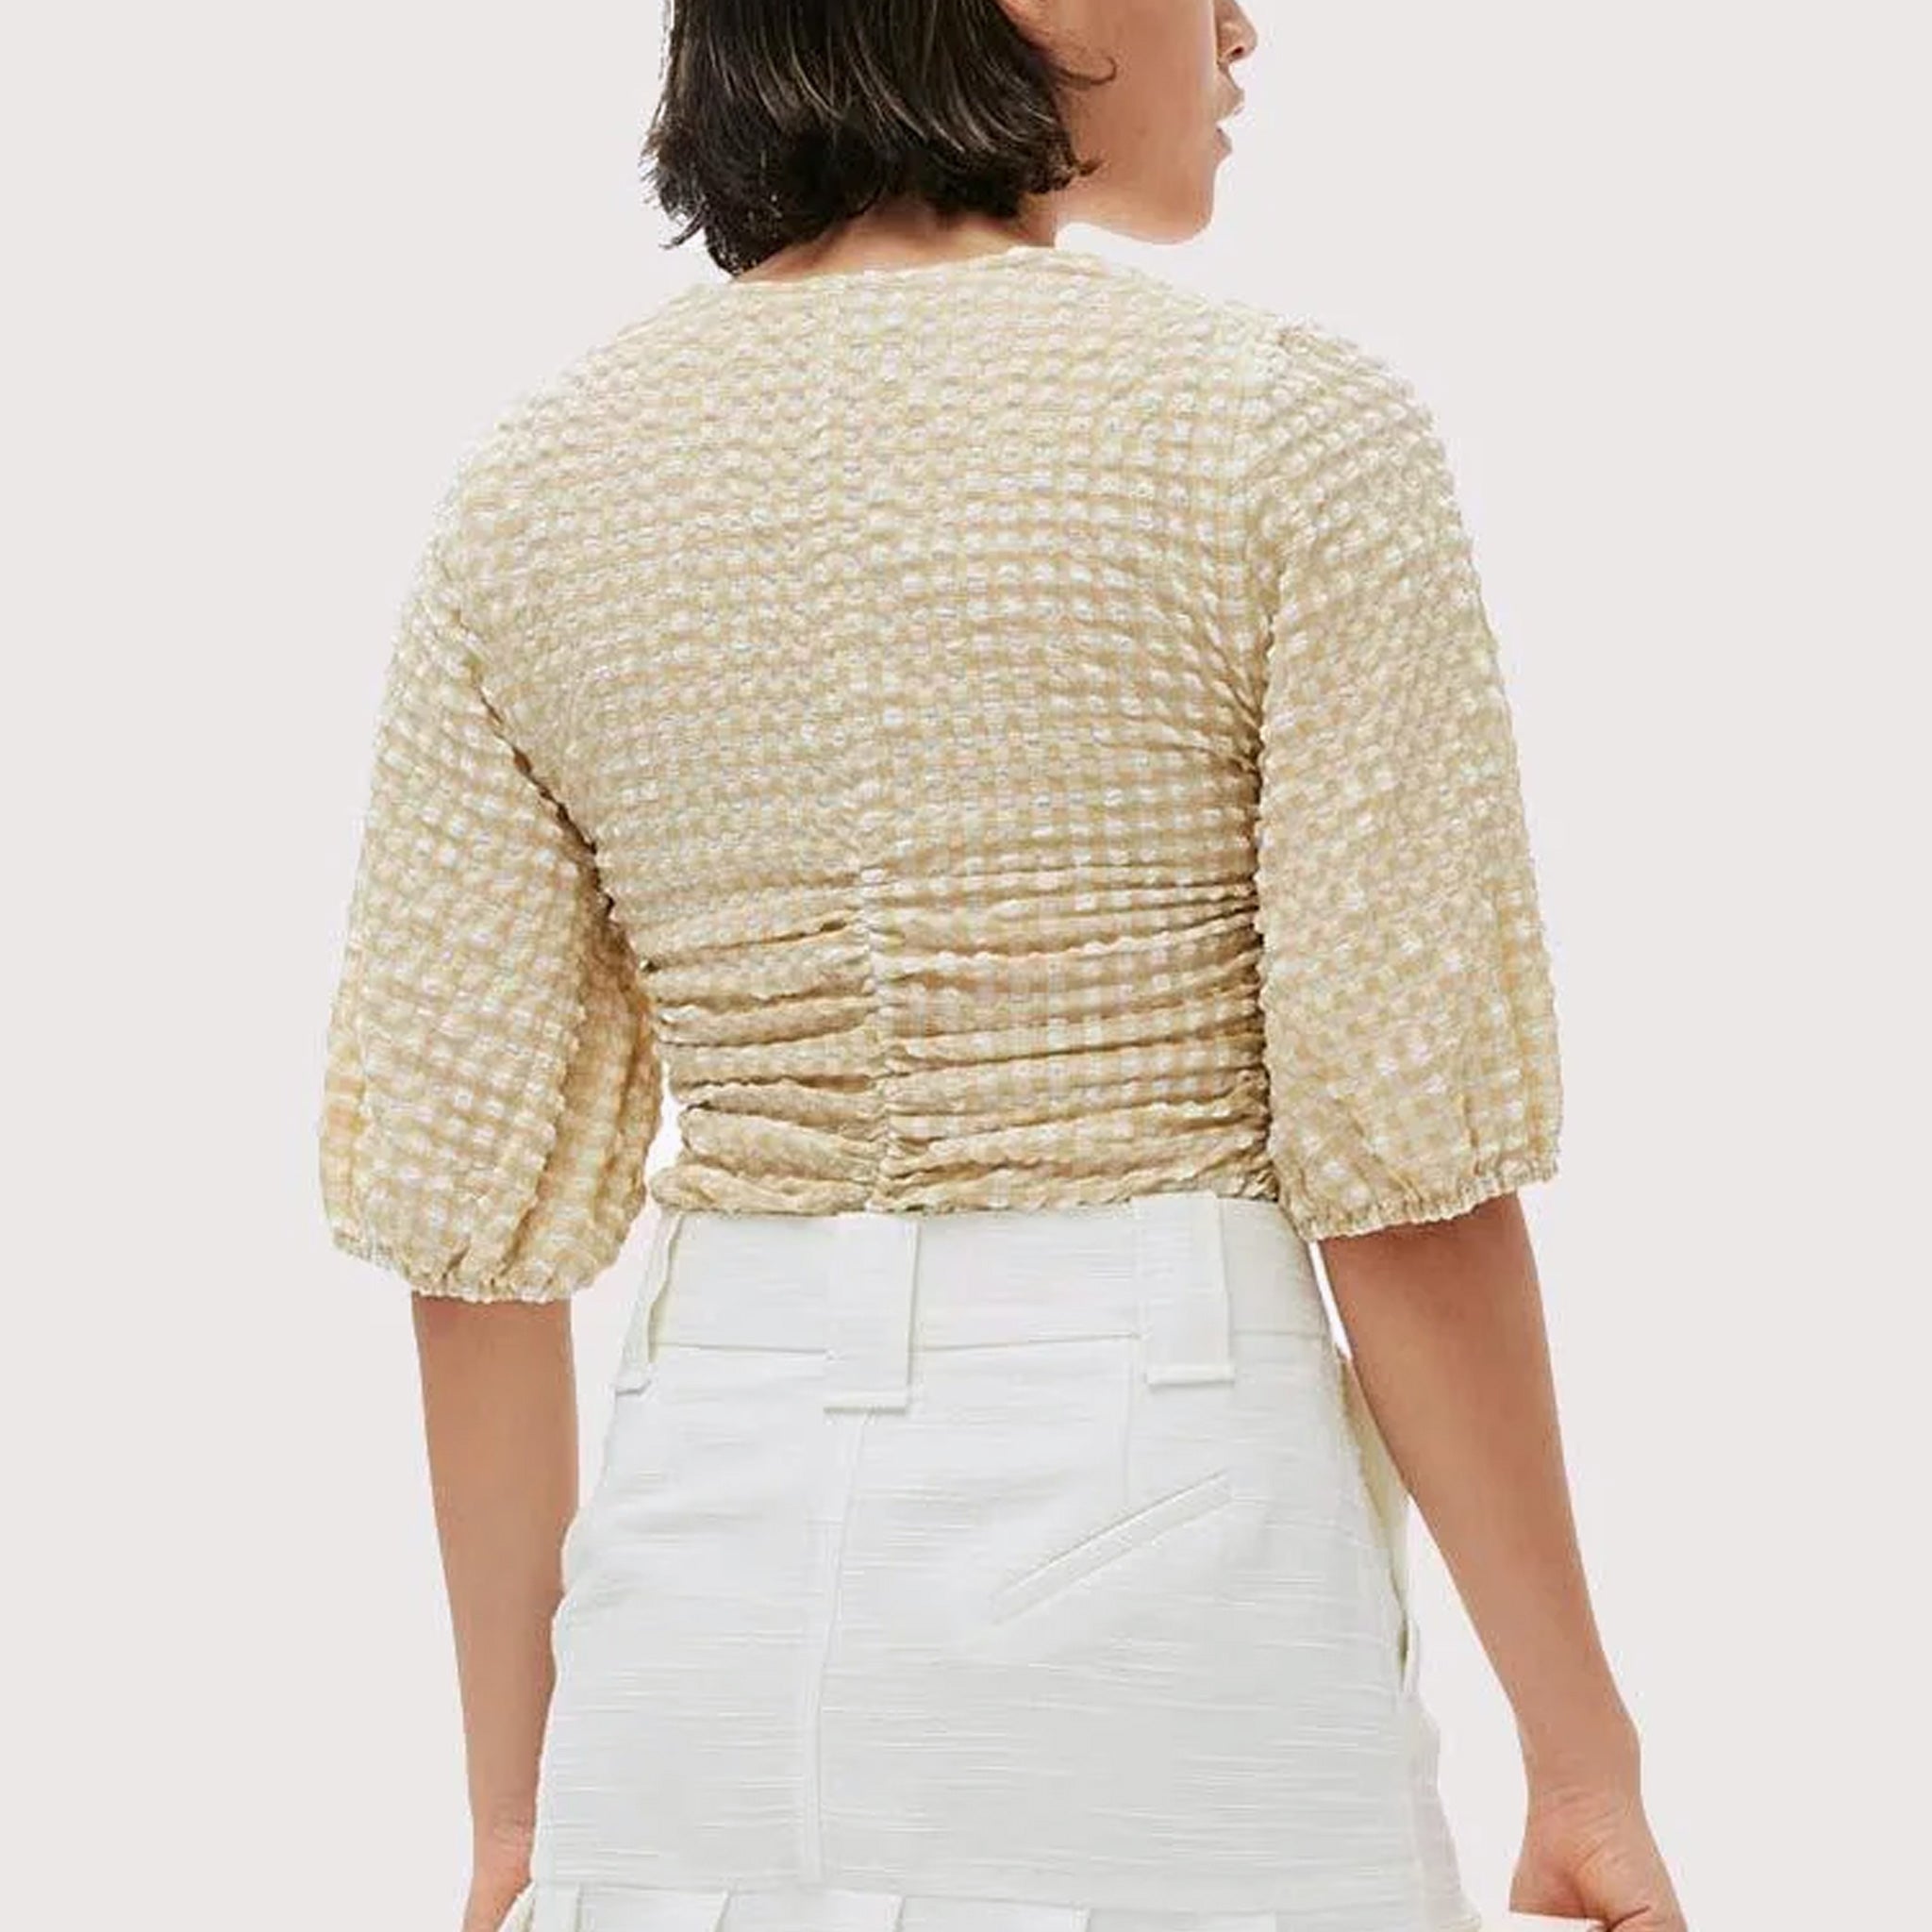 A model wears the beige and white seersucker gathered blouse by Ganni tucked into white bottoms - back view.